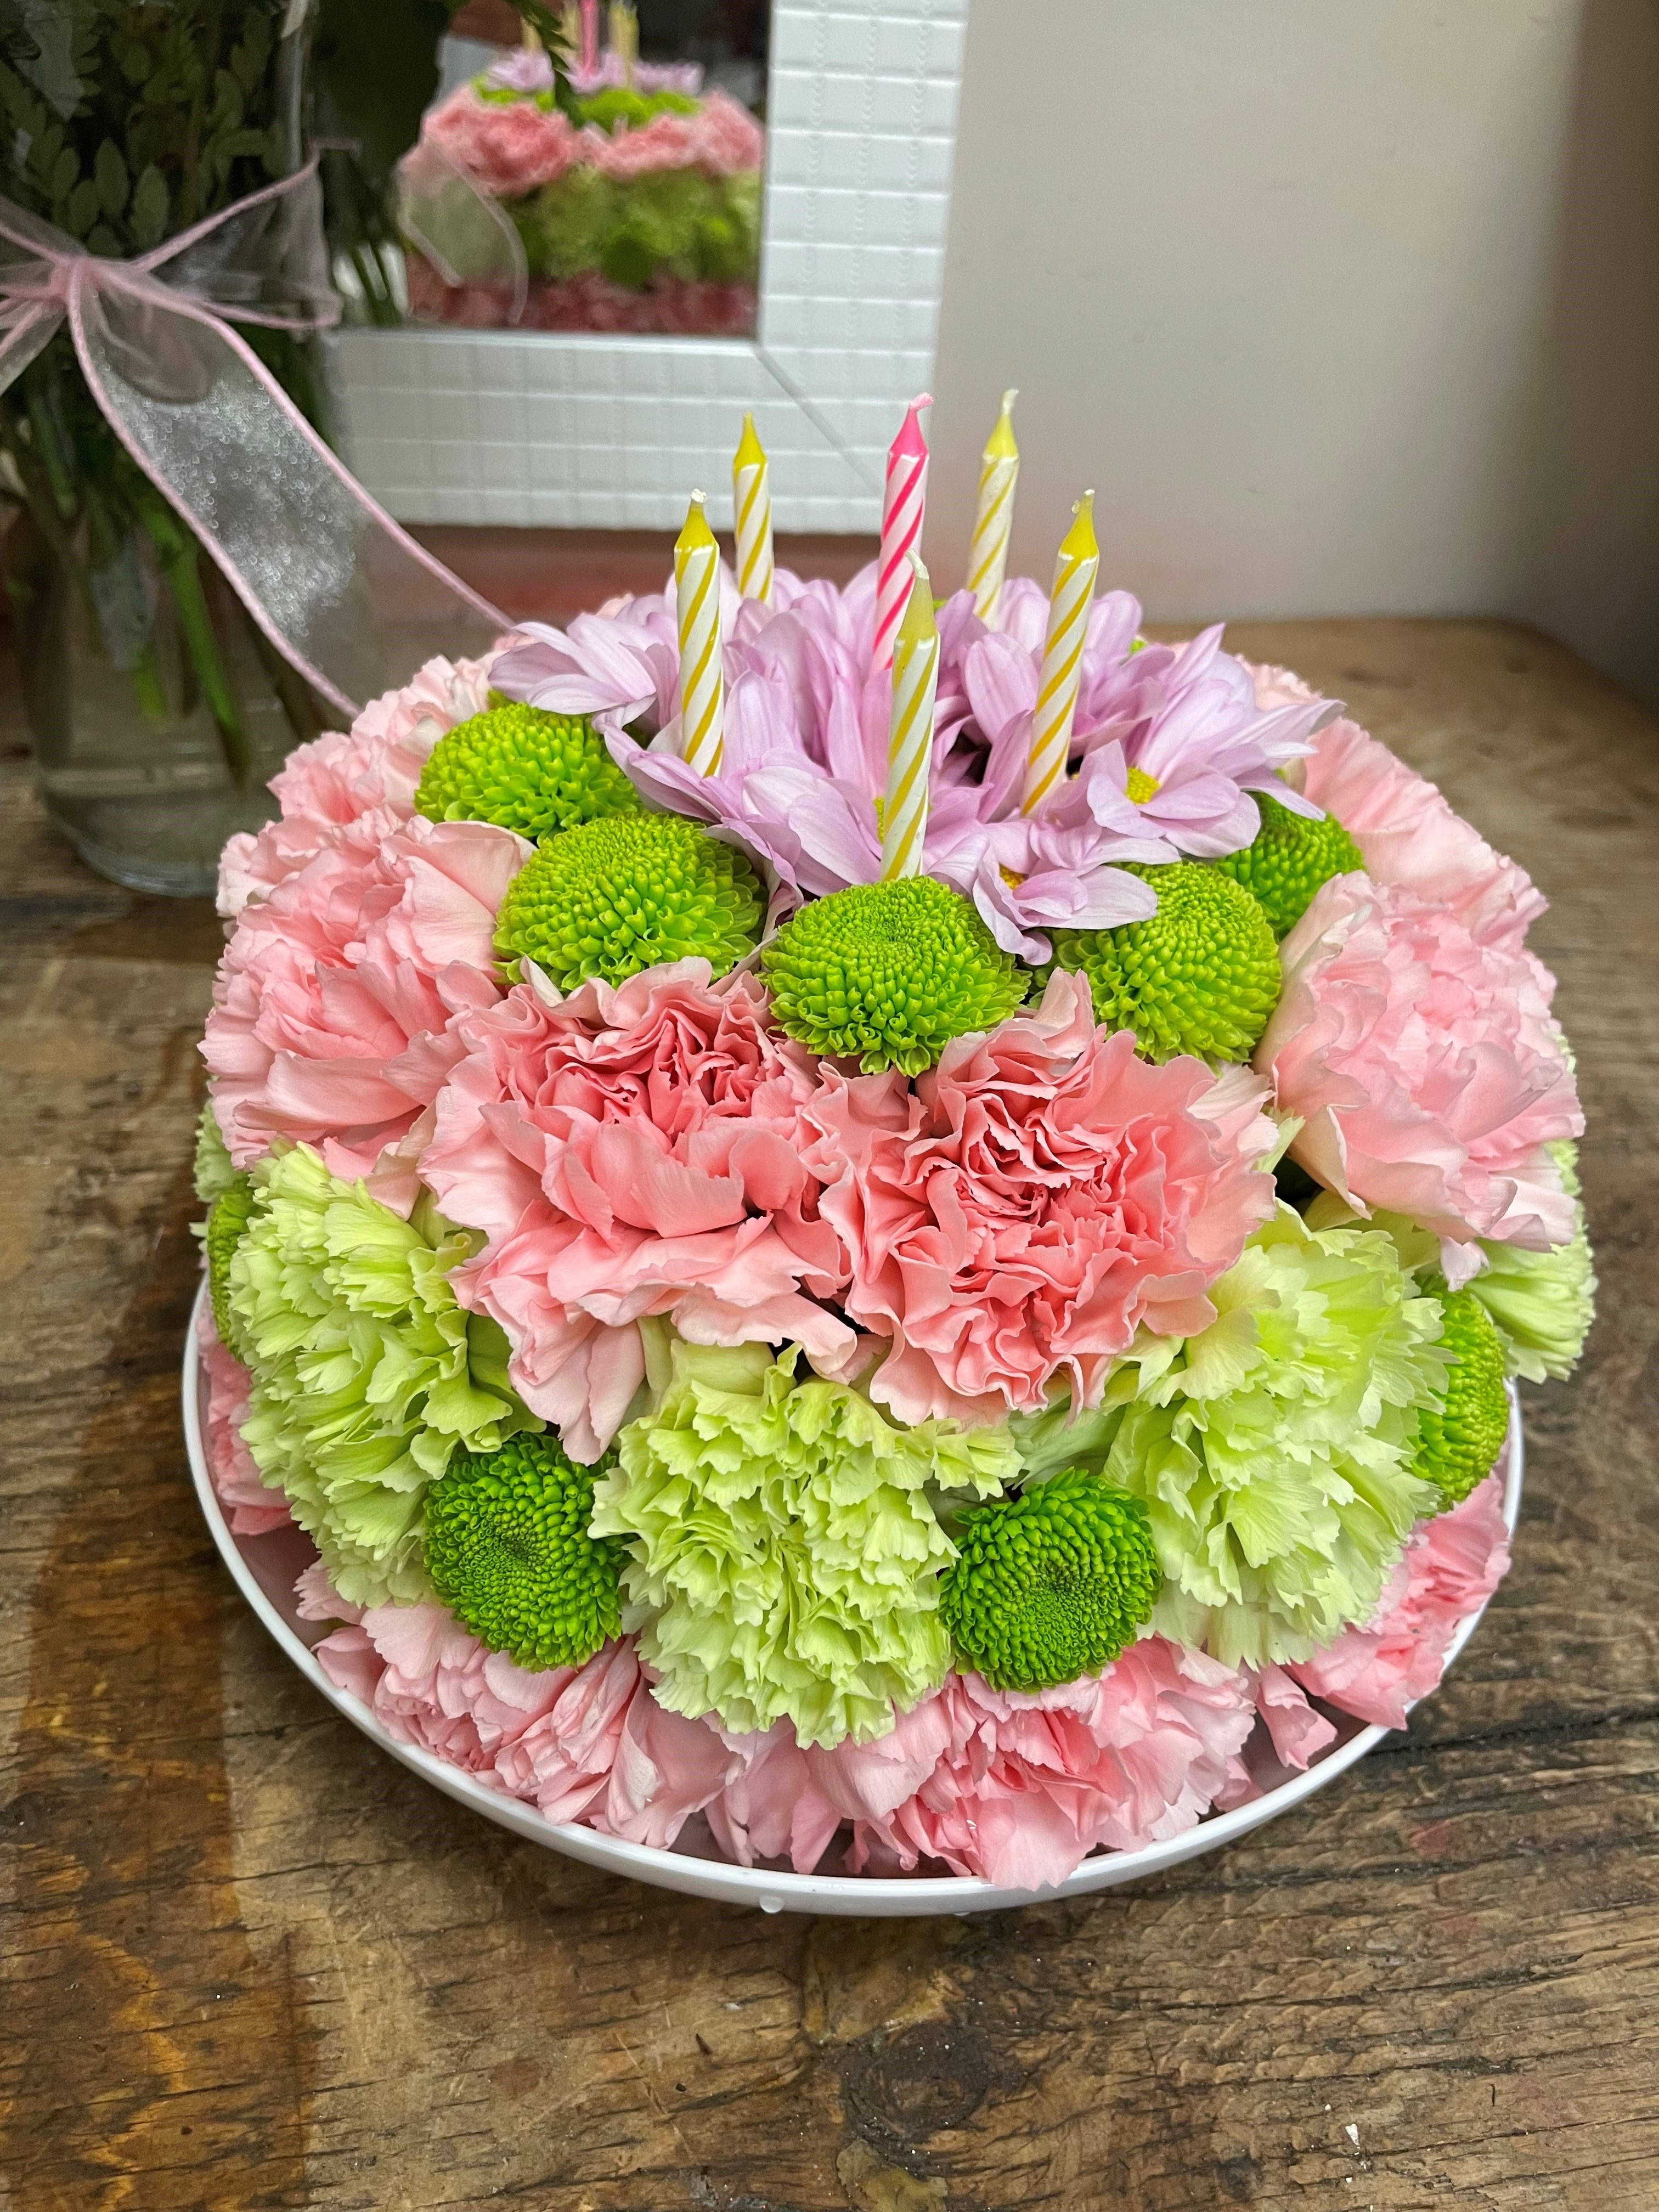 Candy Flower Cake | The Cake Blog